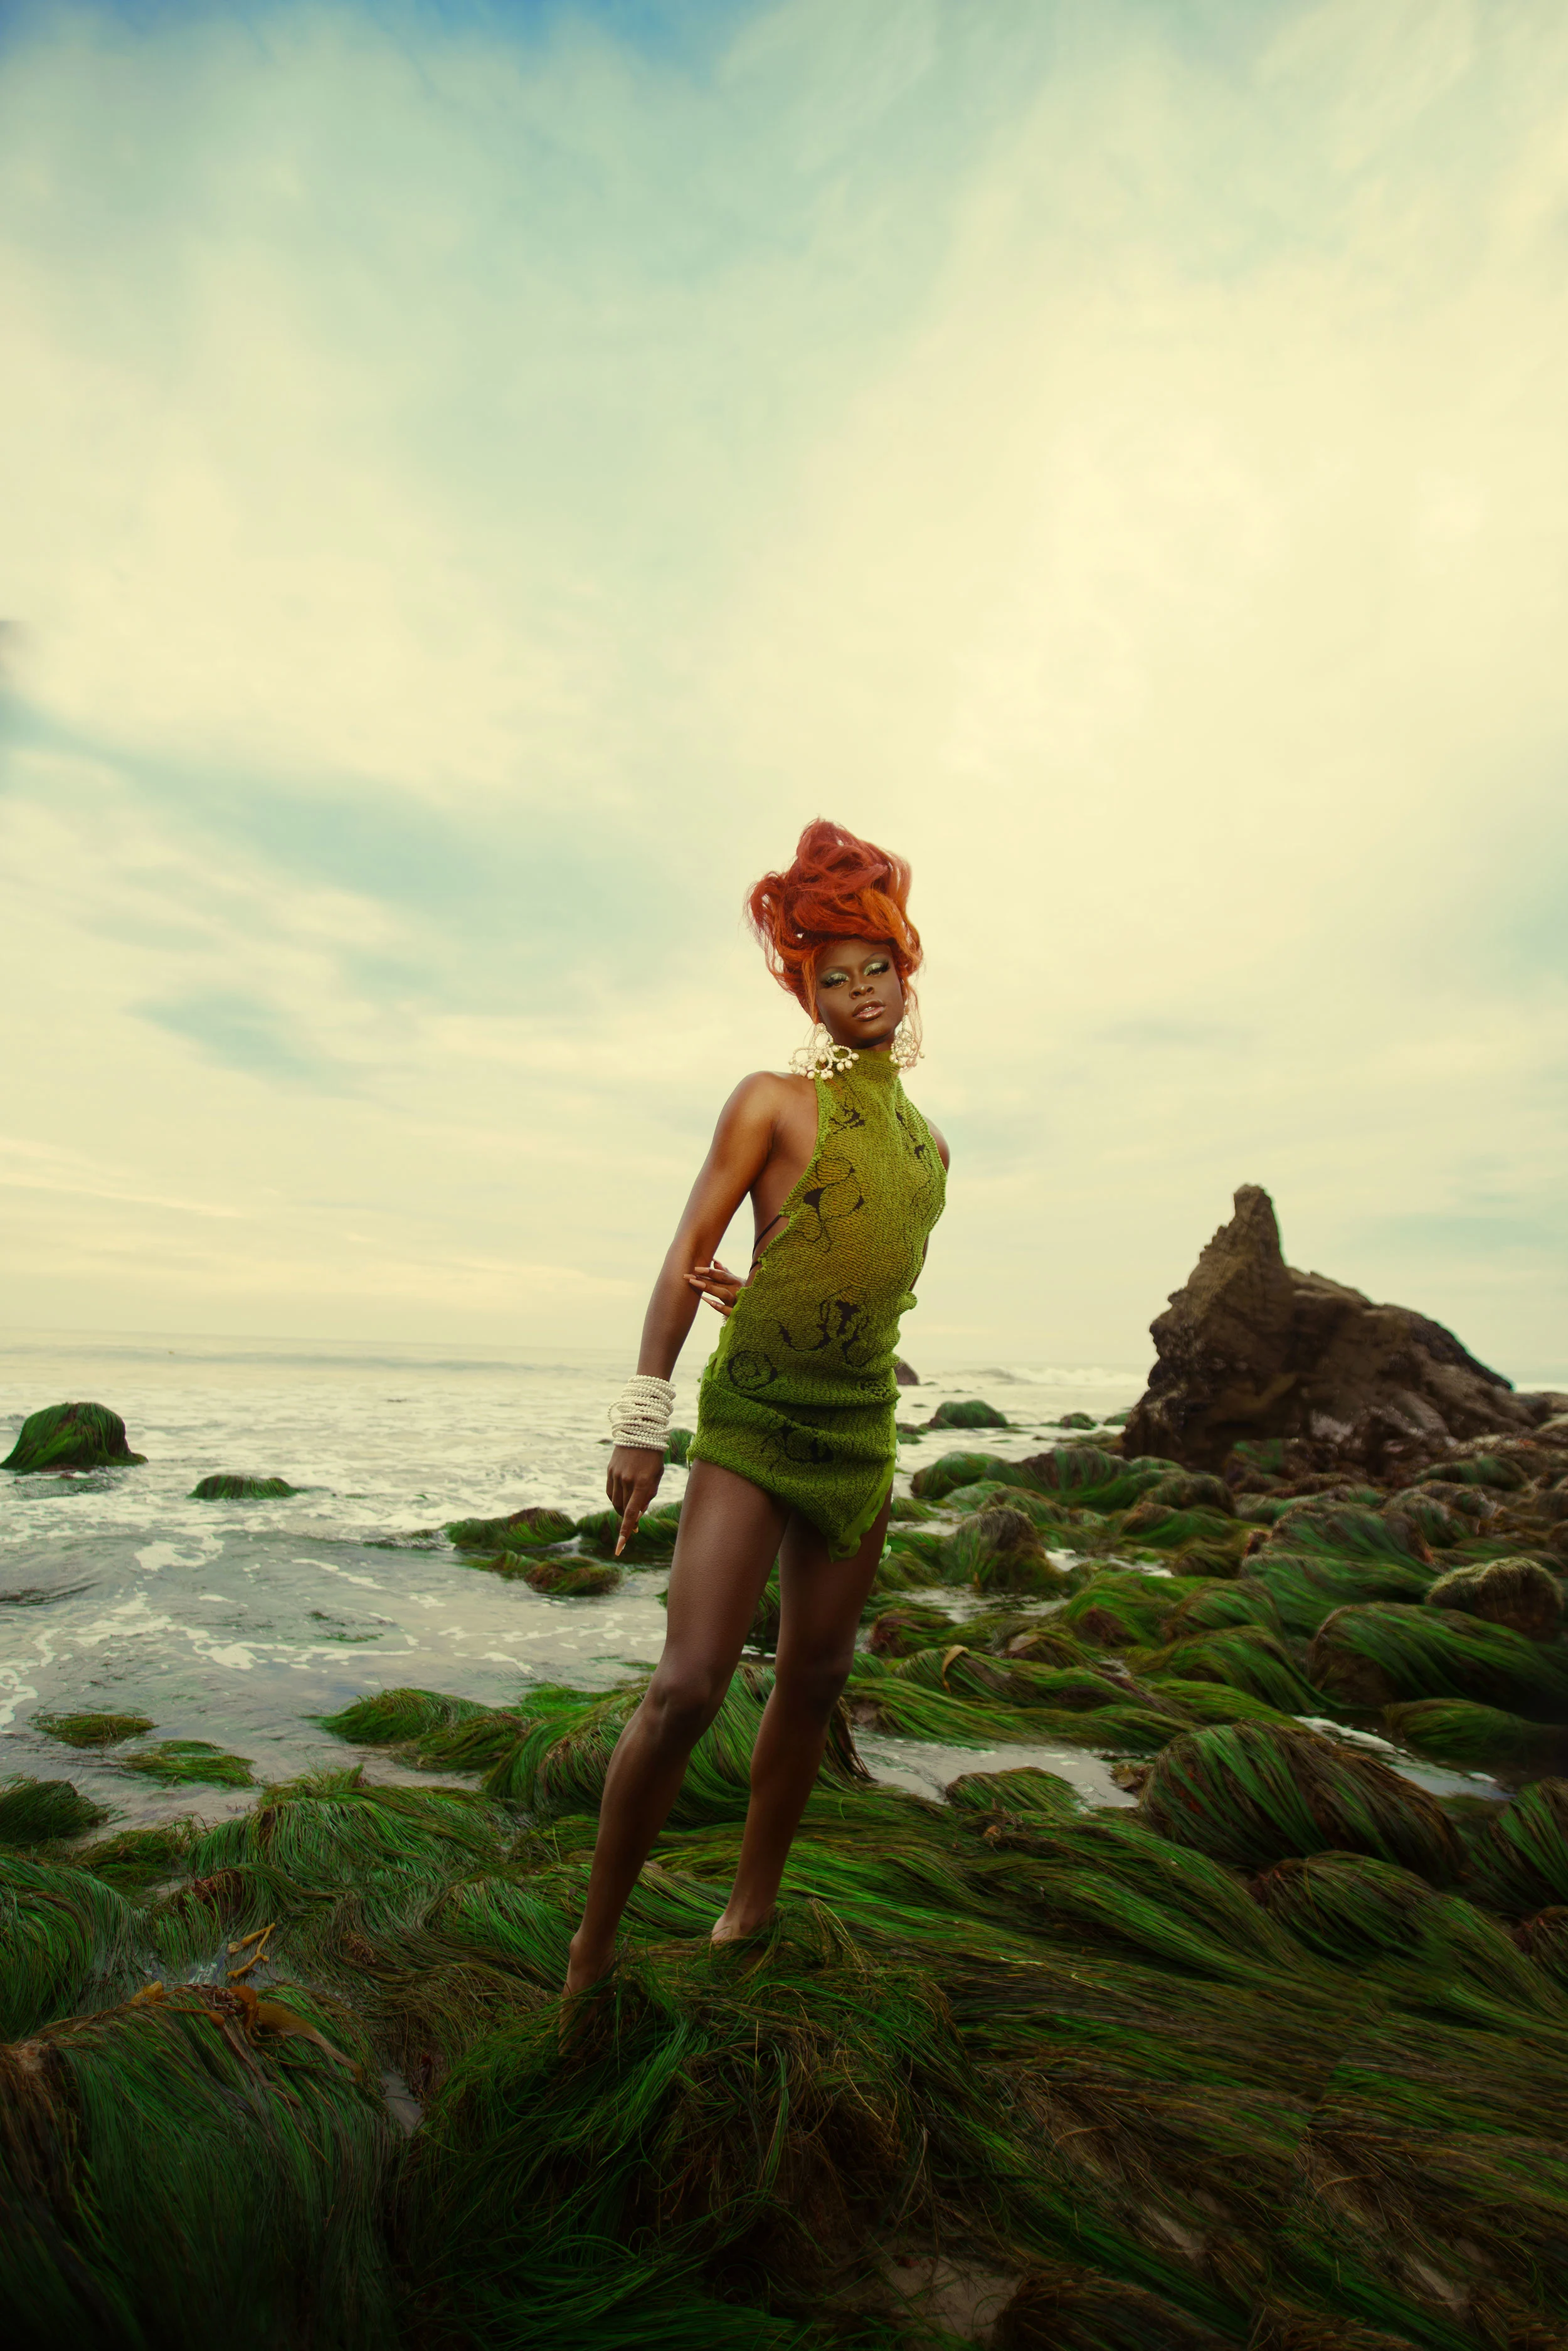 A photograph of a woman with bright orange hair and wearing a green dress, stood on some rocks next to the ocean and staring into the camera, a bright, partially cloudy blue sky above her.